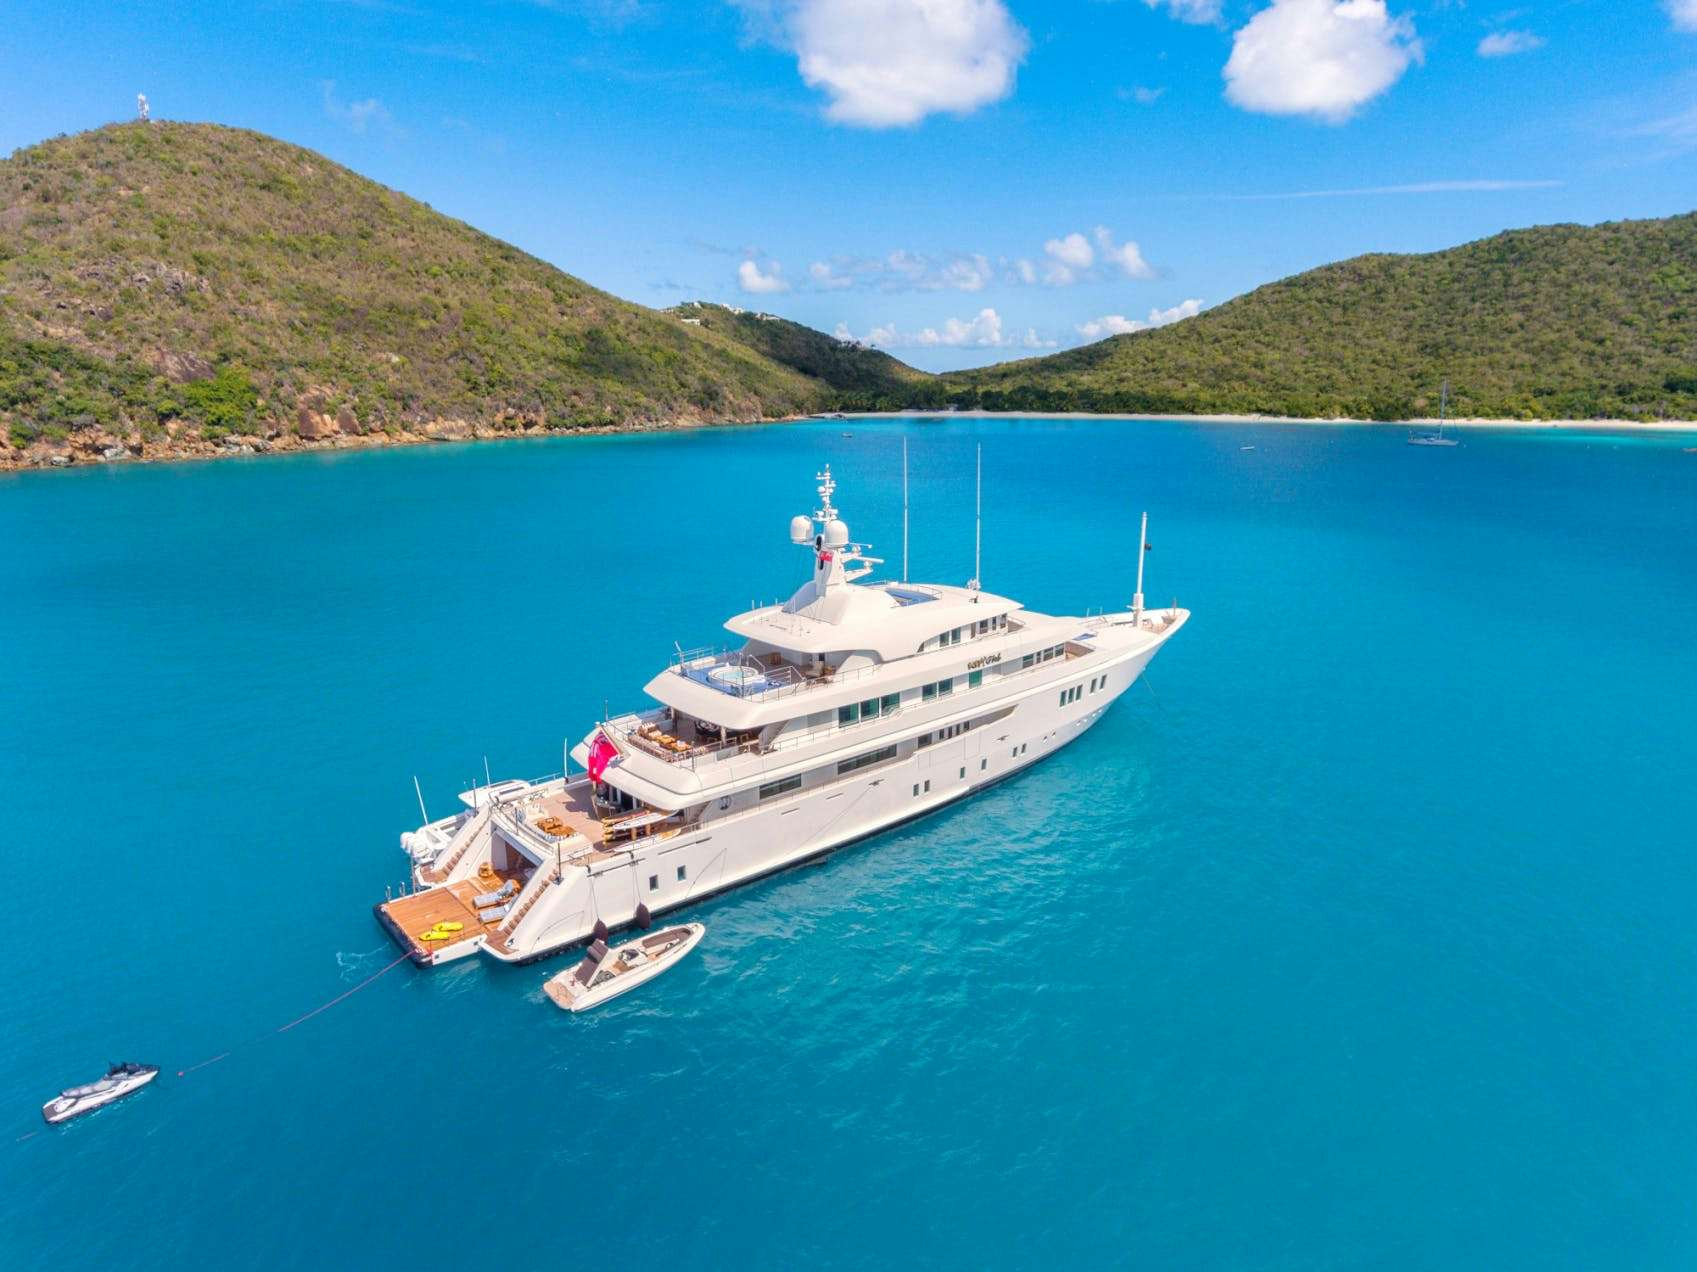 Icon Charter Yacht Party Girl from 500K/week in the Caribbean